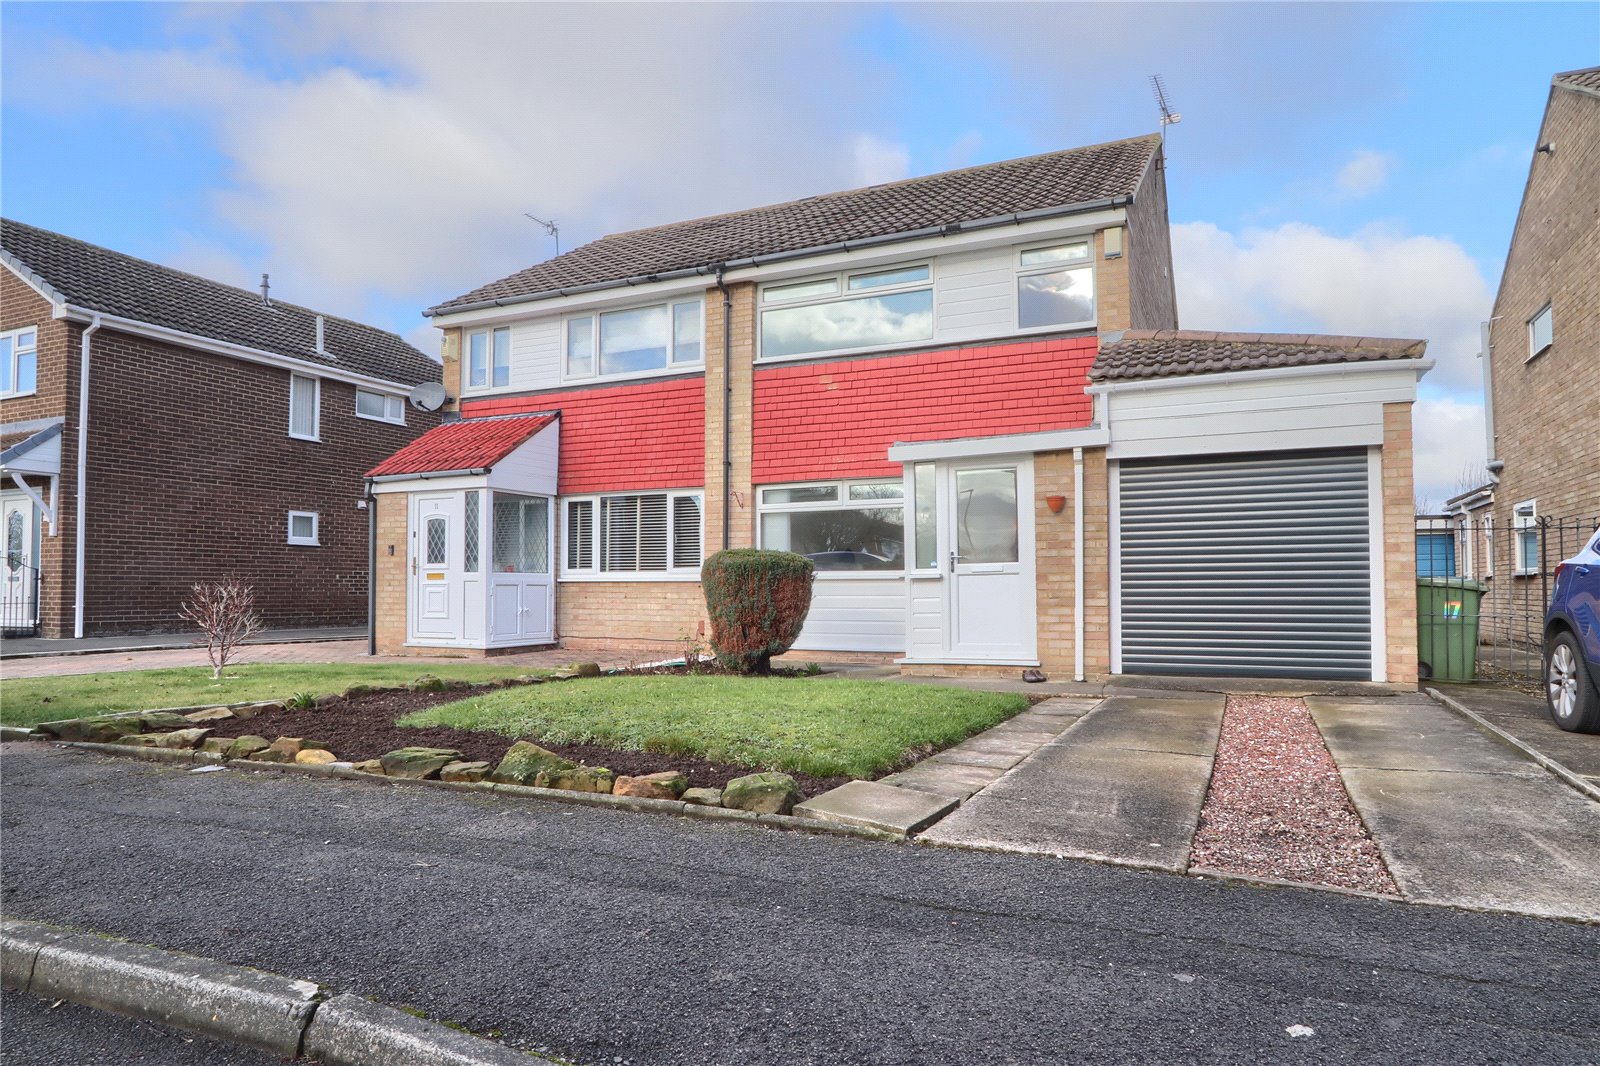 3 bed house for sale in Rook Lane, Norton - Property Image 1